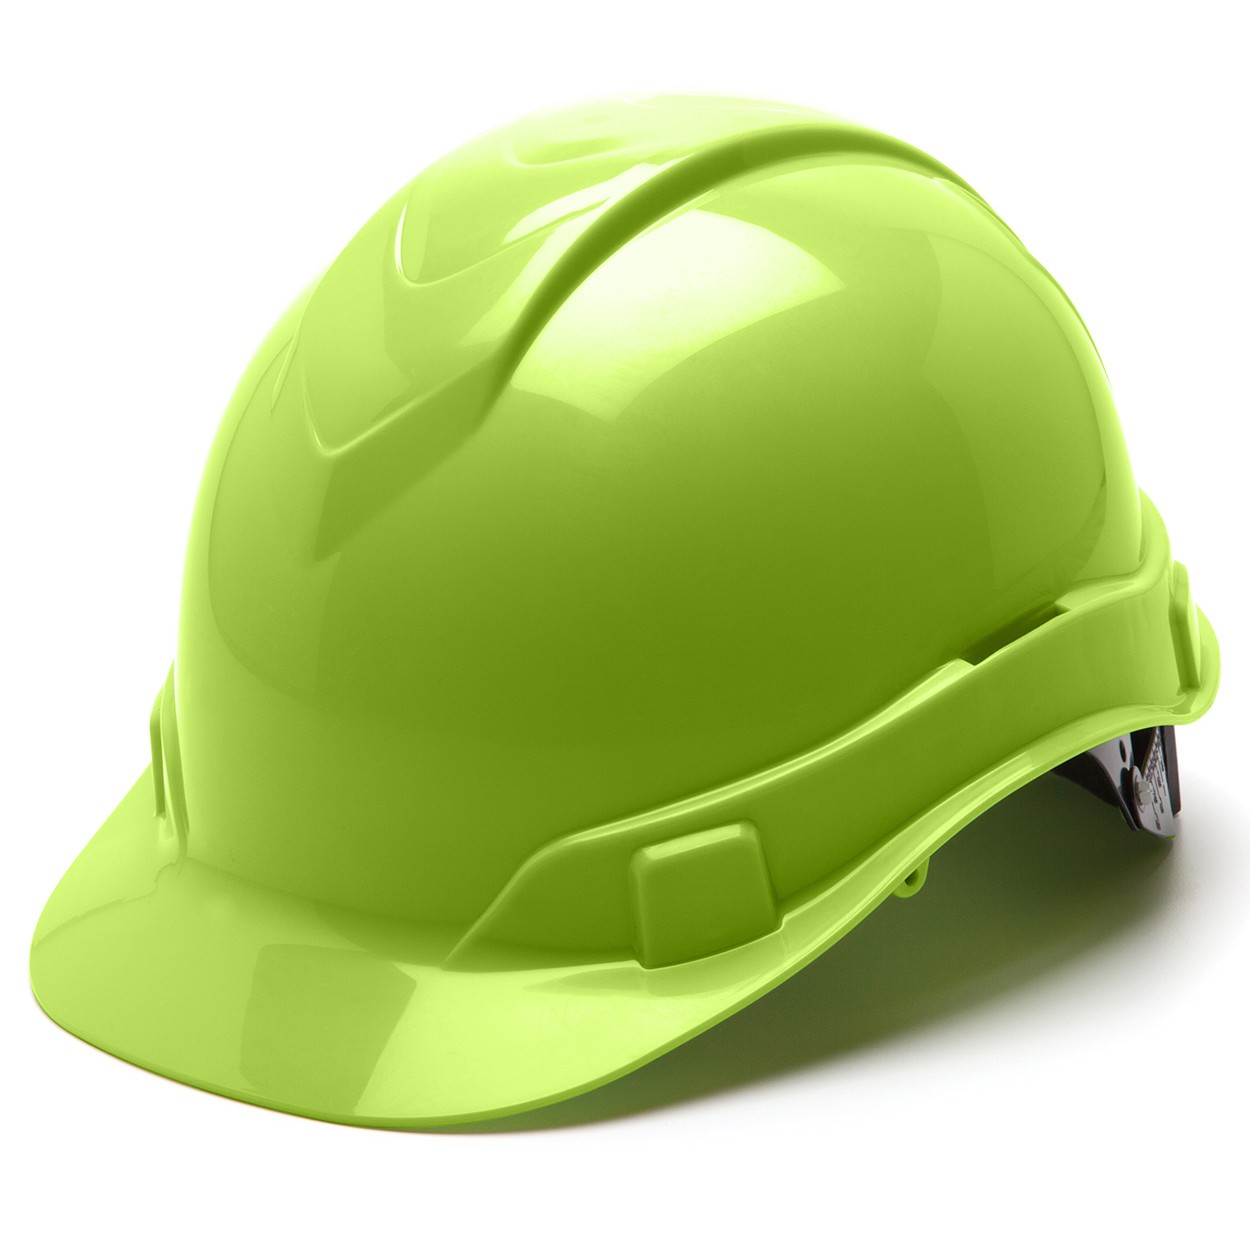 Pyramex Ridgeline Cap Style Hard Hat with 4 Point Ratchet Suspension from Columbia Safety